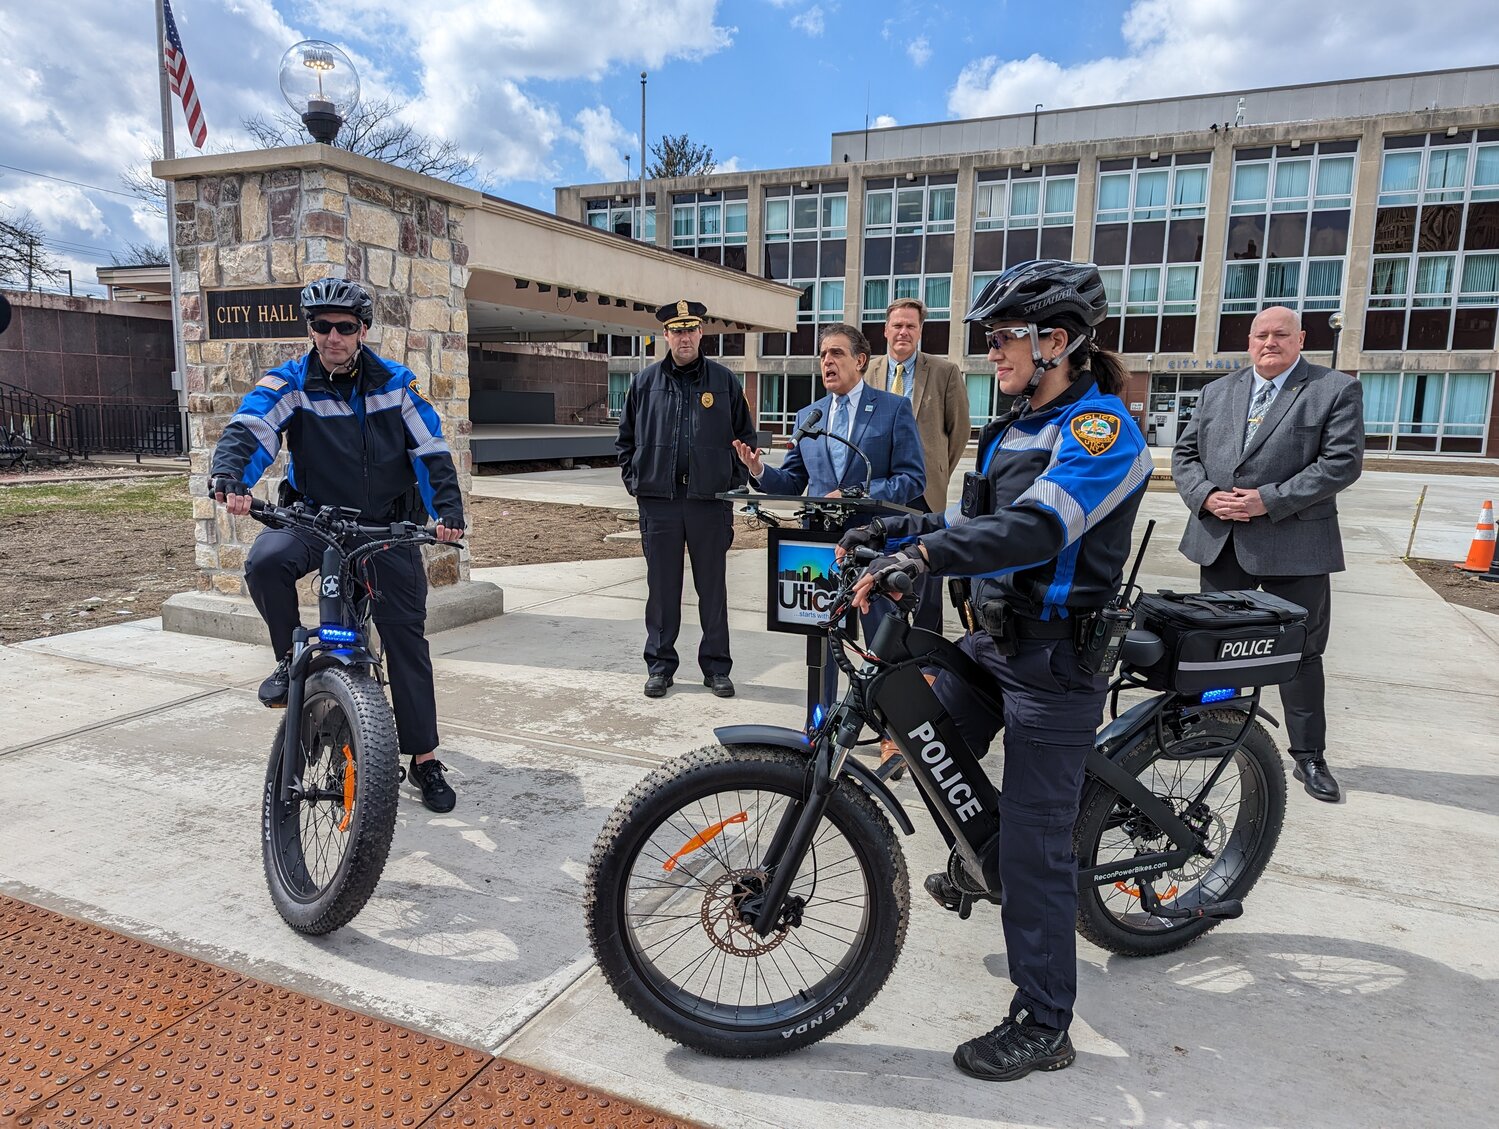 Two Utica police officers show off the new, heavy duty electronic bicycles that will be going on patrol in Utica parks. From left: Sgt. James Laurey, Capt. Brian Bansner, Mayor Robert Palmieri, Deputy Chief Ed Noonan, Inv. Shannon Acquaviva, and Utica Police Chief Mark Williams.